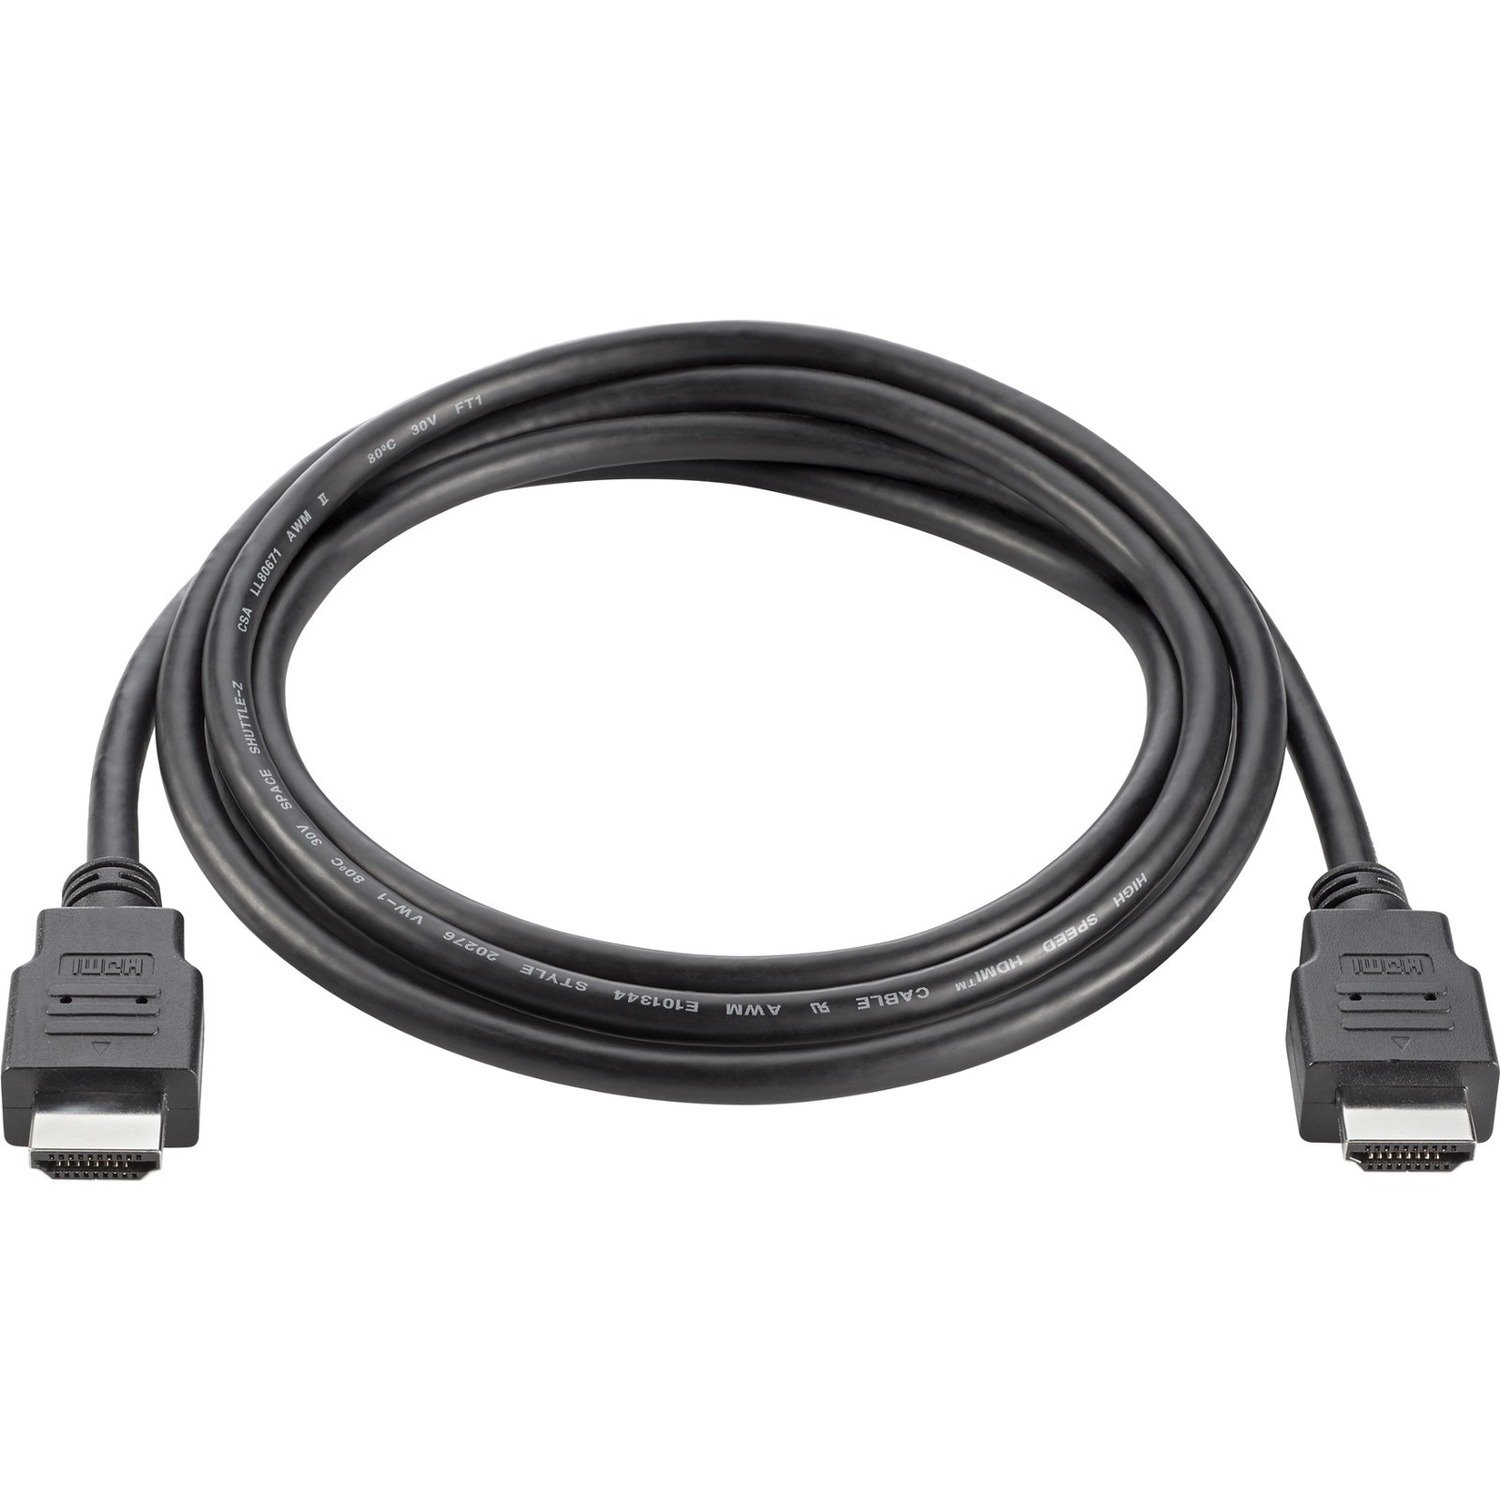 HP 1.83 m HDMI A/V Cable for Audio/Video Device, Desktop Computer - 1